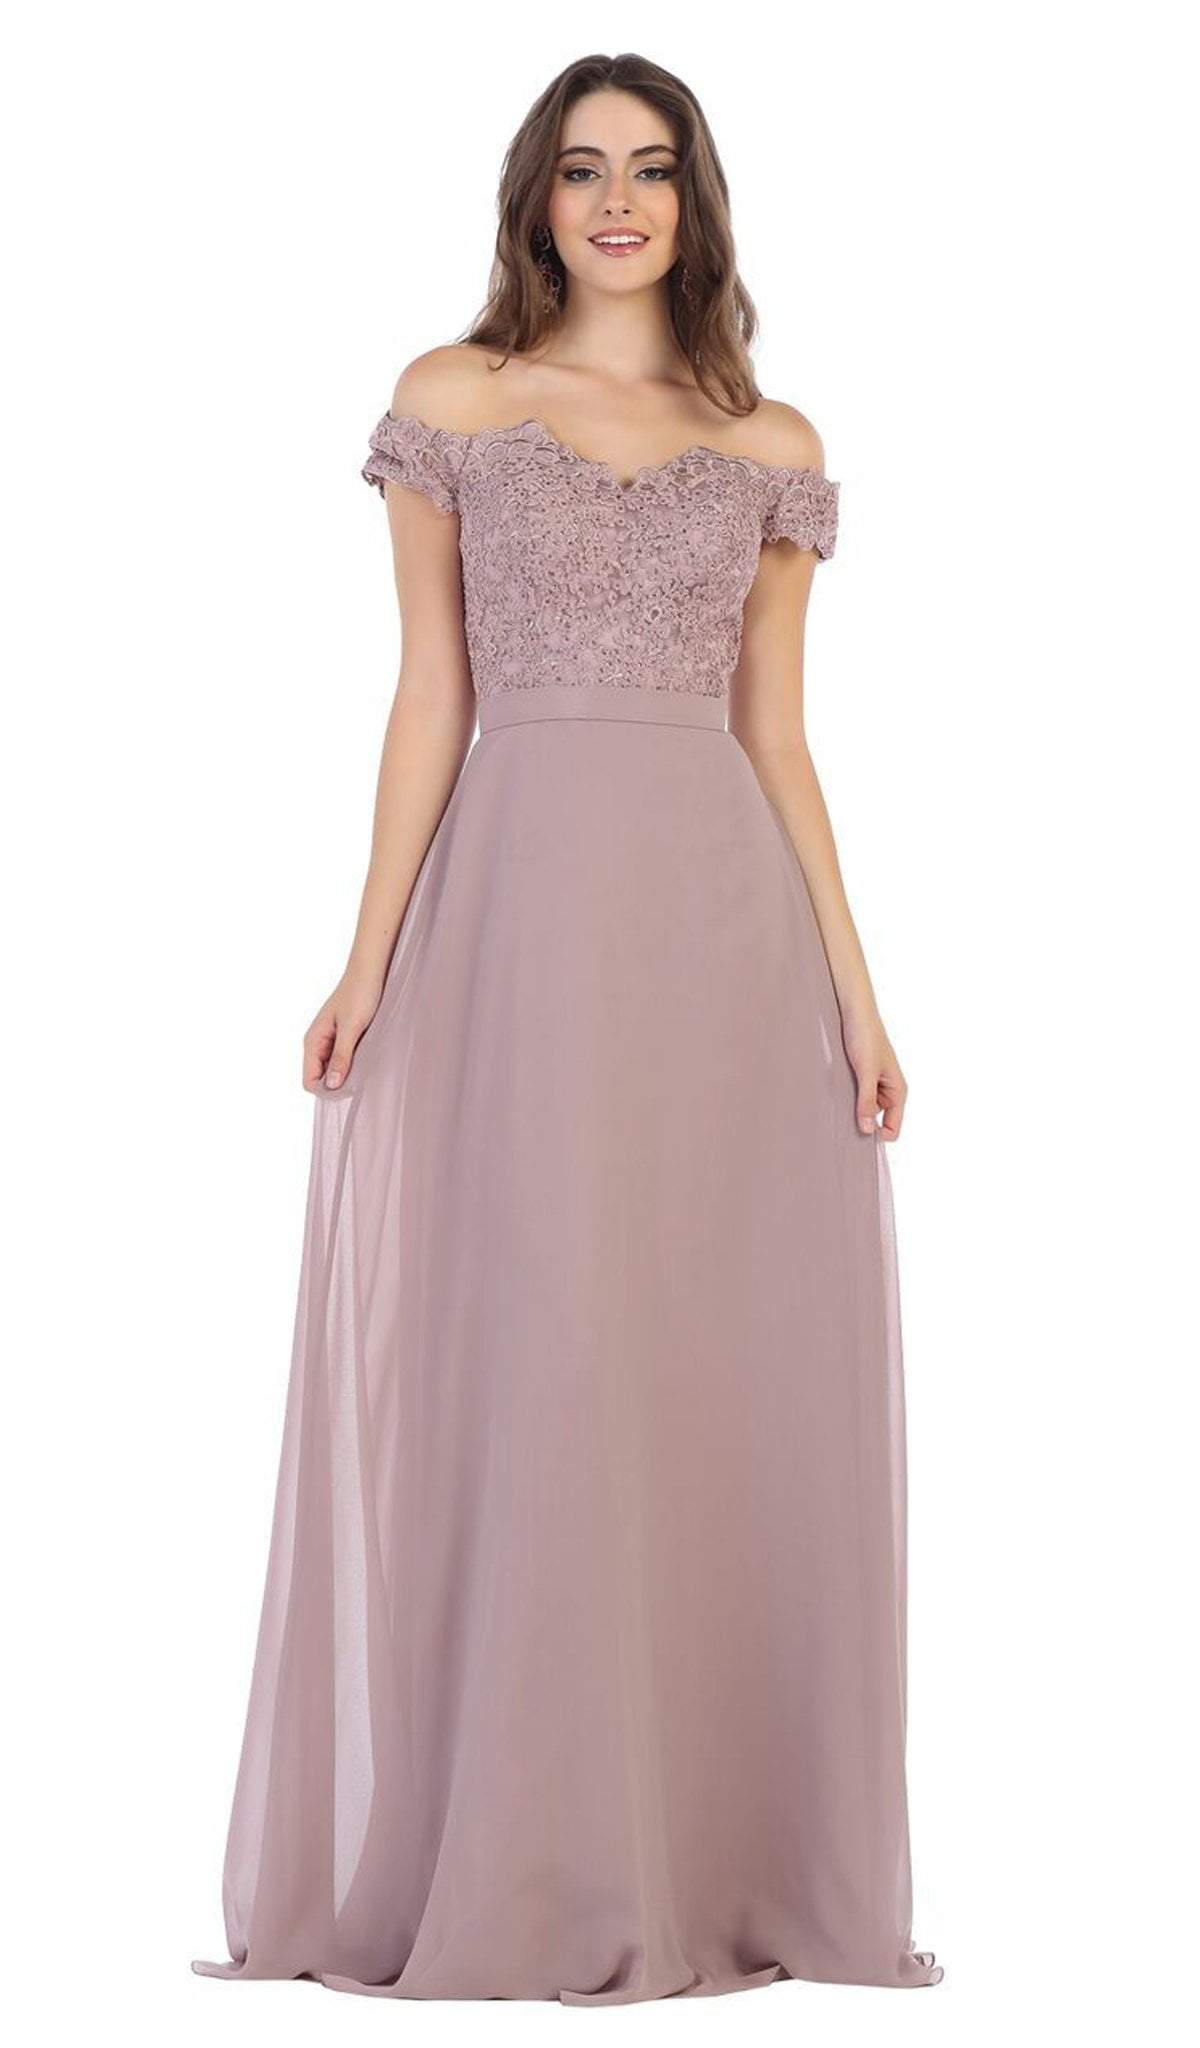 May Queen - MQ1601 Lace Appliqued Chiffon Off Shoulder Formal Gown